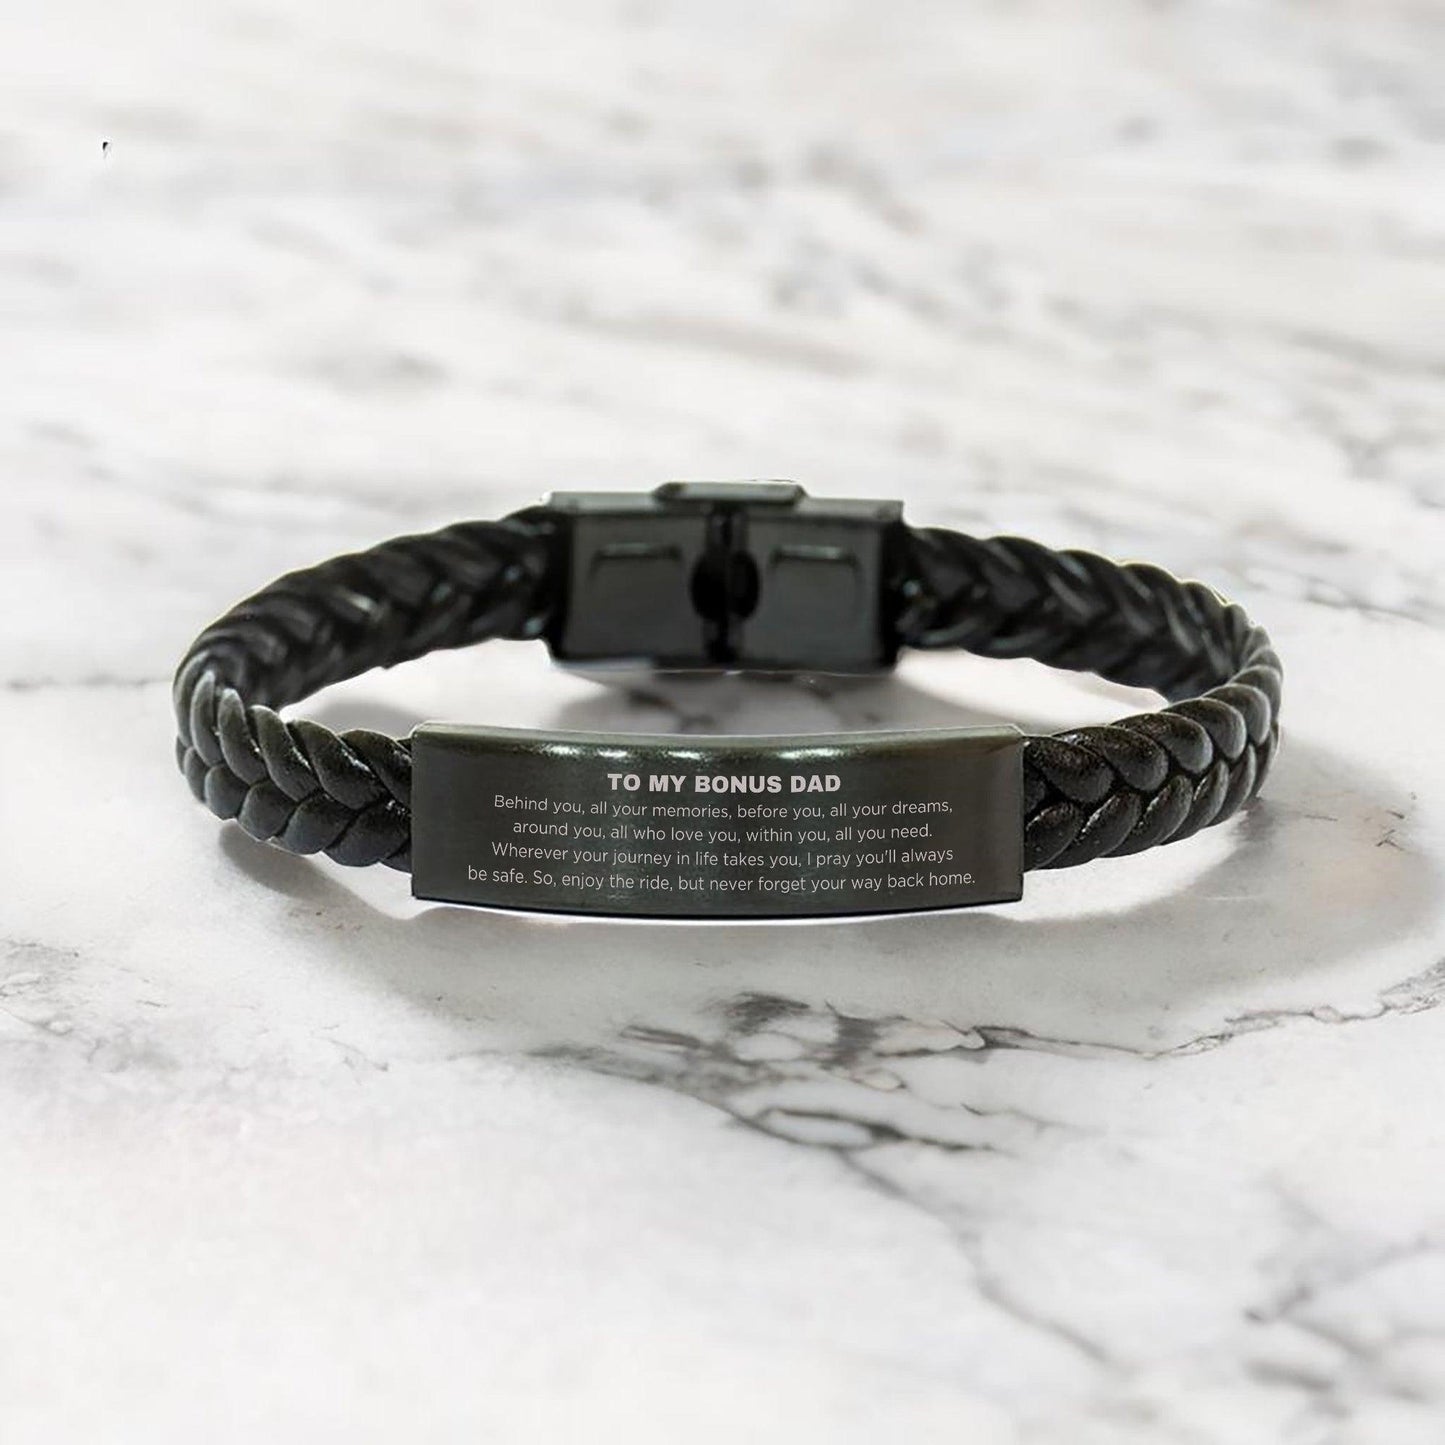 Inspirational Bonus Dad Braided Leather Engraved Bracelet - Behind you, all your Memories, Before you, all your Dreams - Birthday, Christmas Holiday Gifts - Mallard Moon Gift Shop